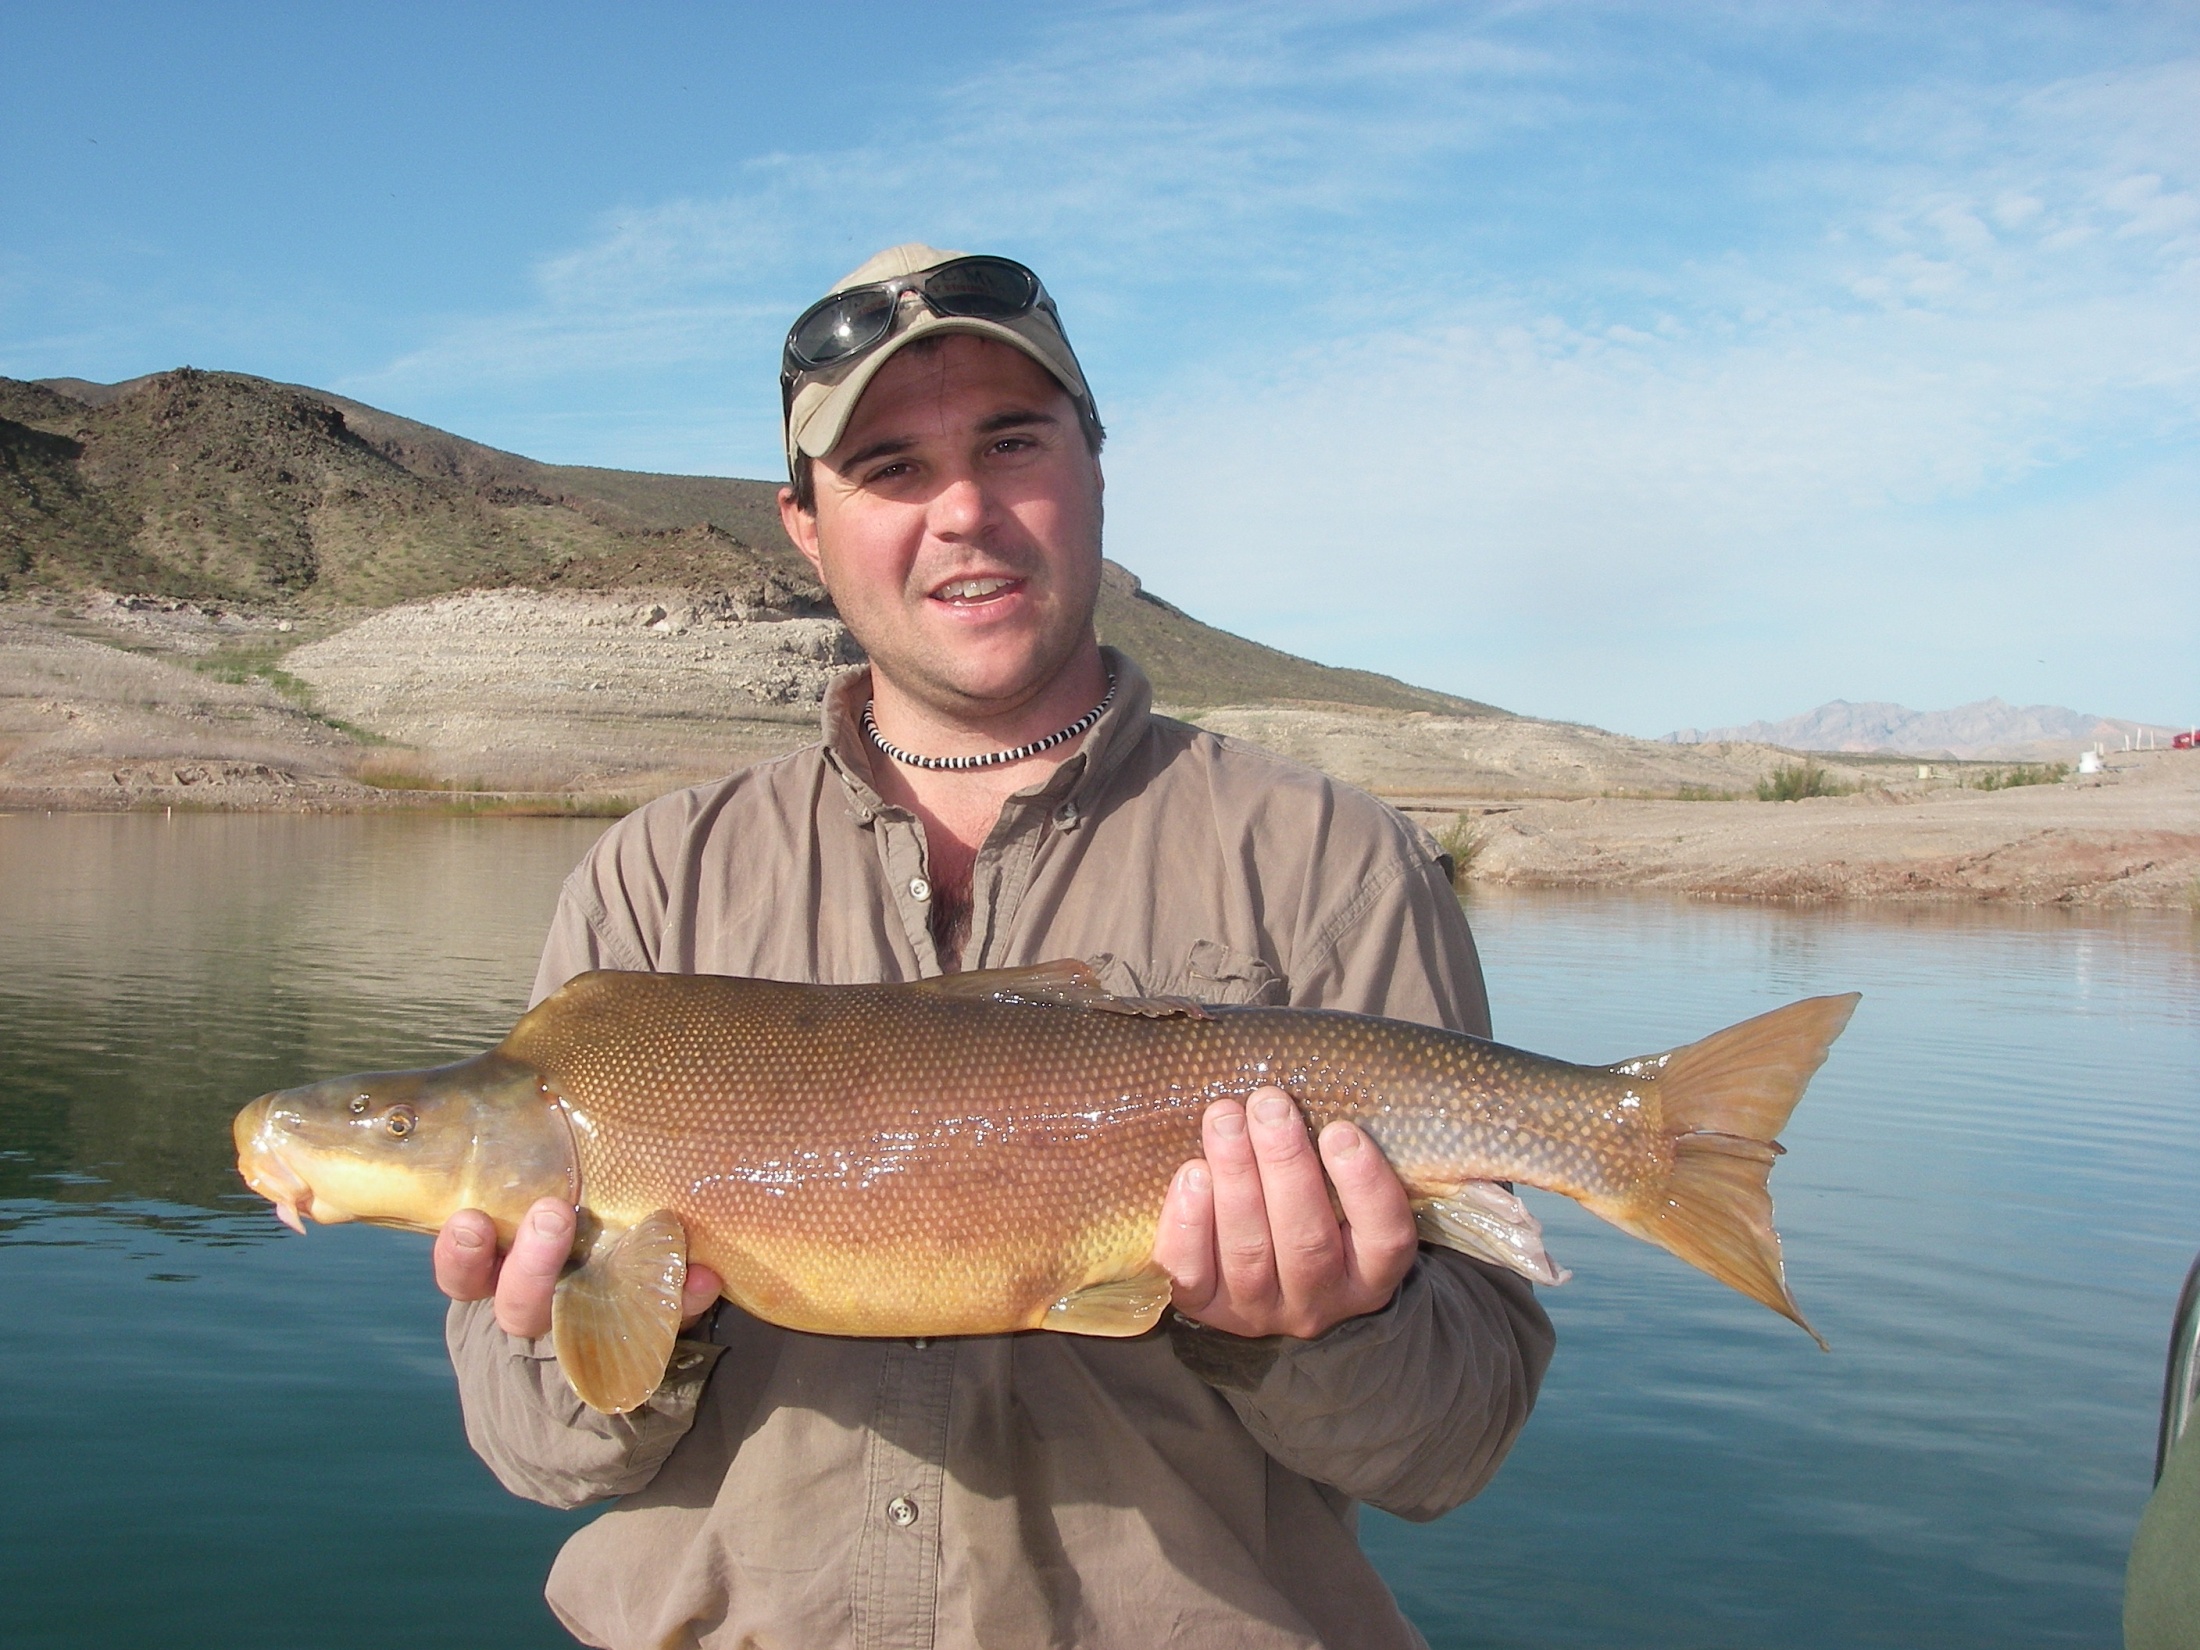 Ron Rogers biologist with Bio-West Inc., holds a large razorback sucker captured in Lake Mead near the Colorado River inflow area